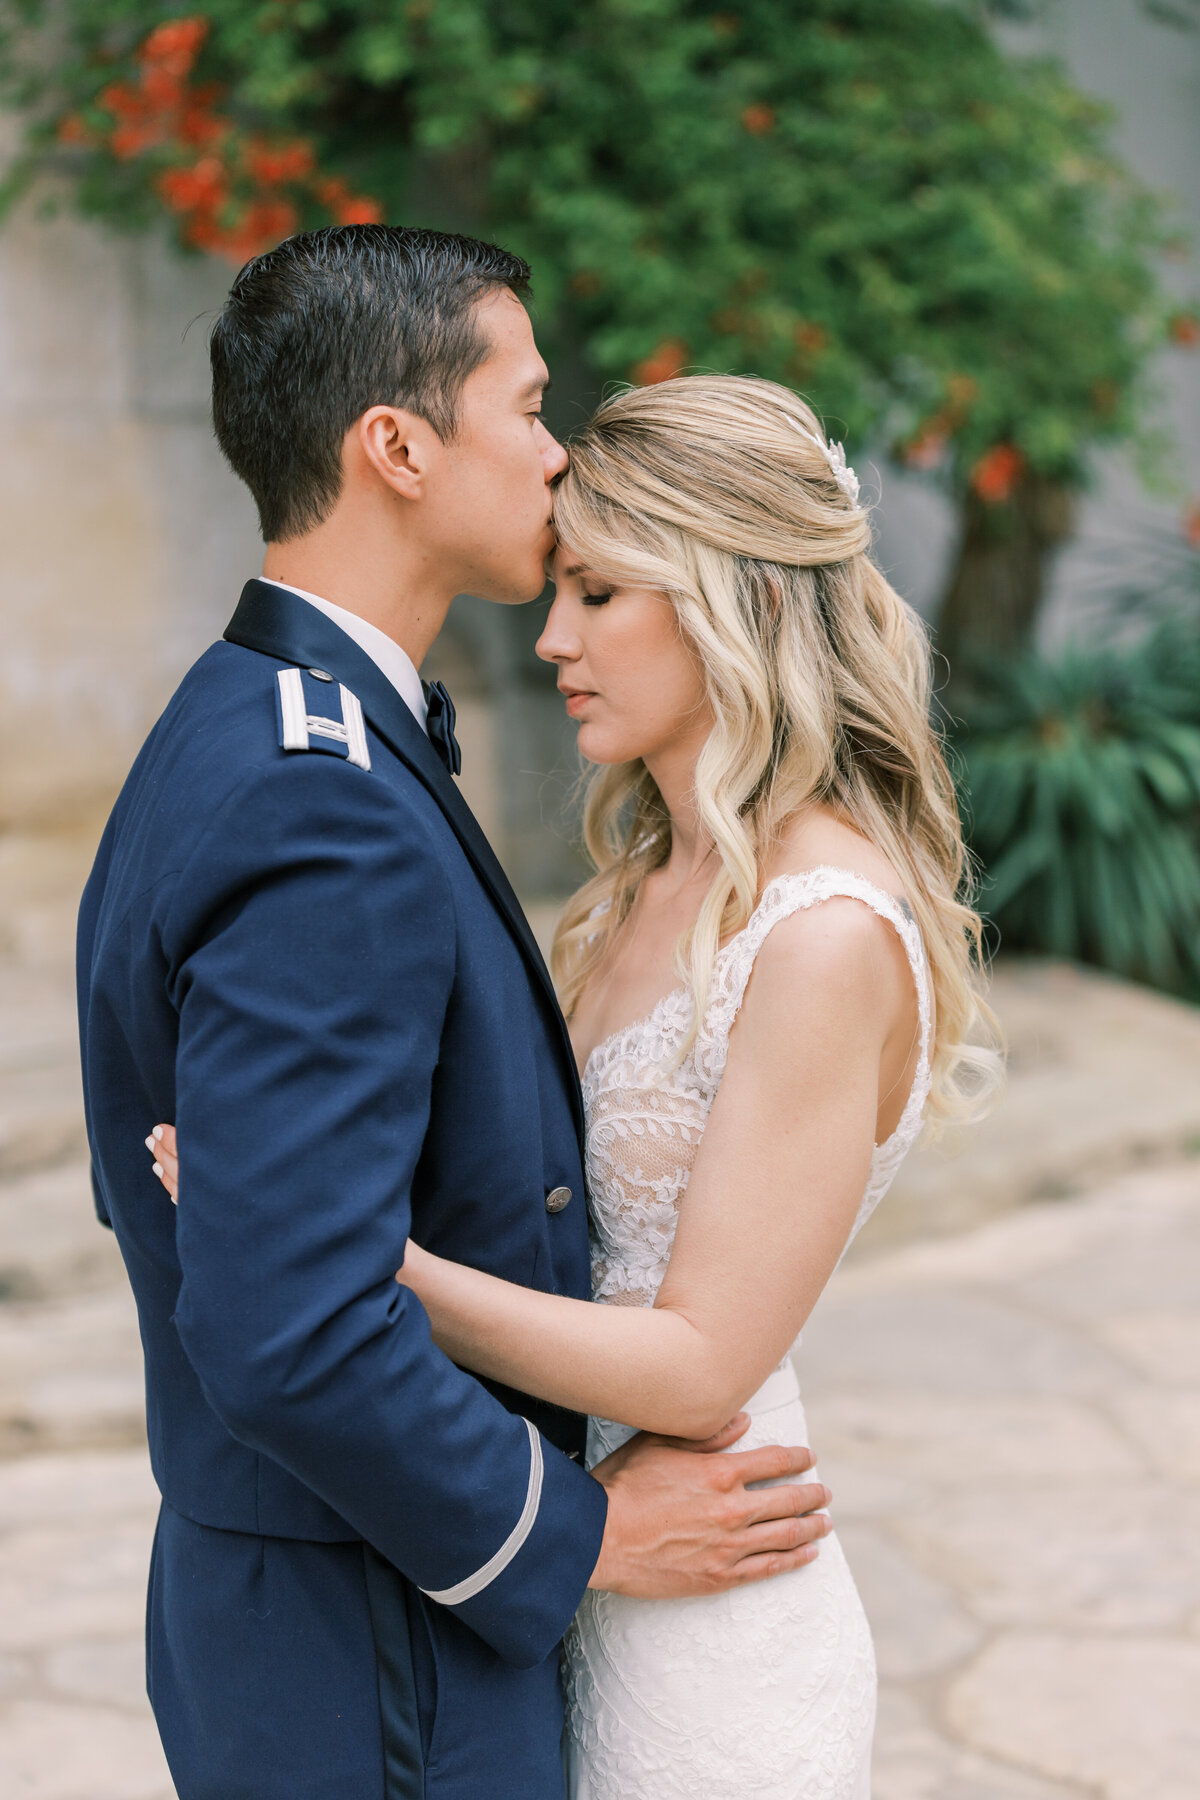 Jocelyn and Spencer Photography California Santa Barbara Wedding Engagement Luxury High End Romantic Imagery Light Airy Fineart Film Style11